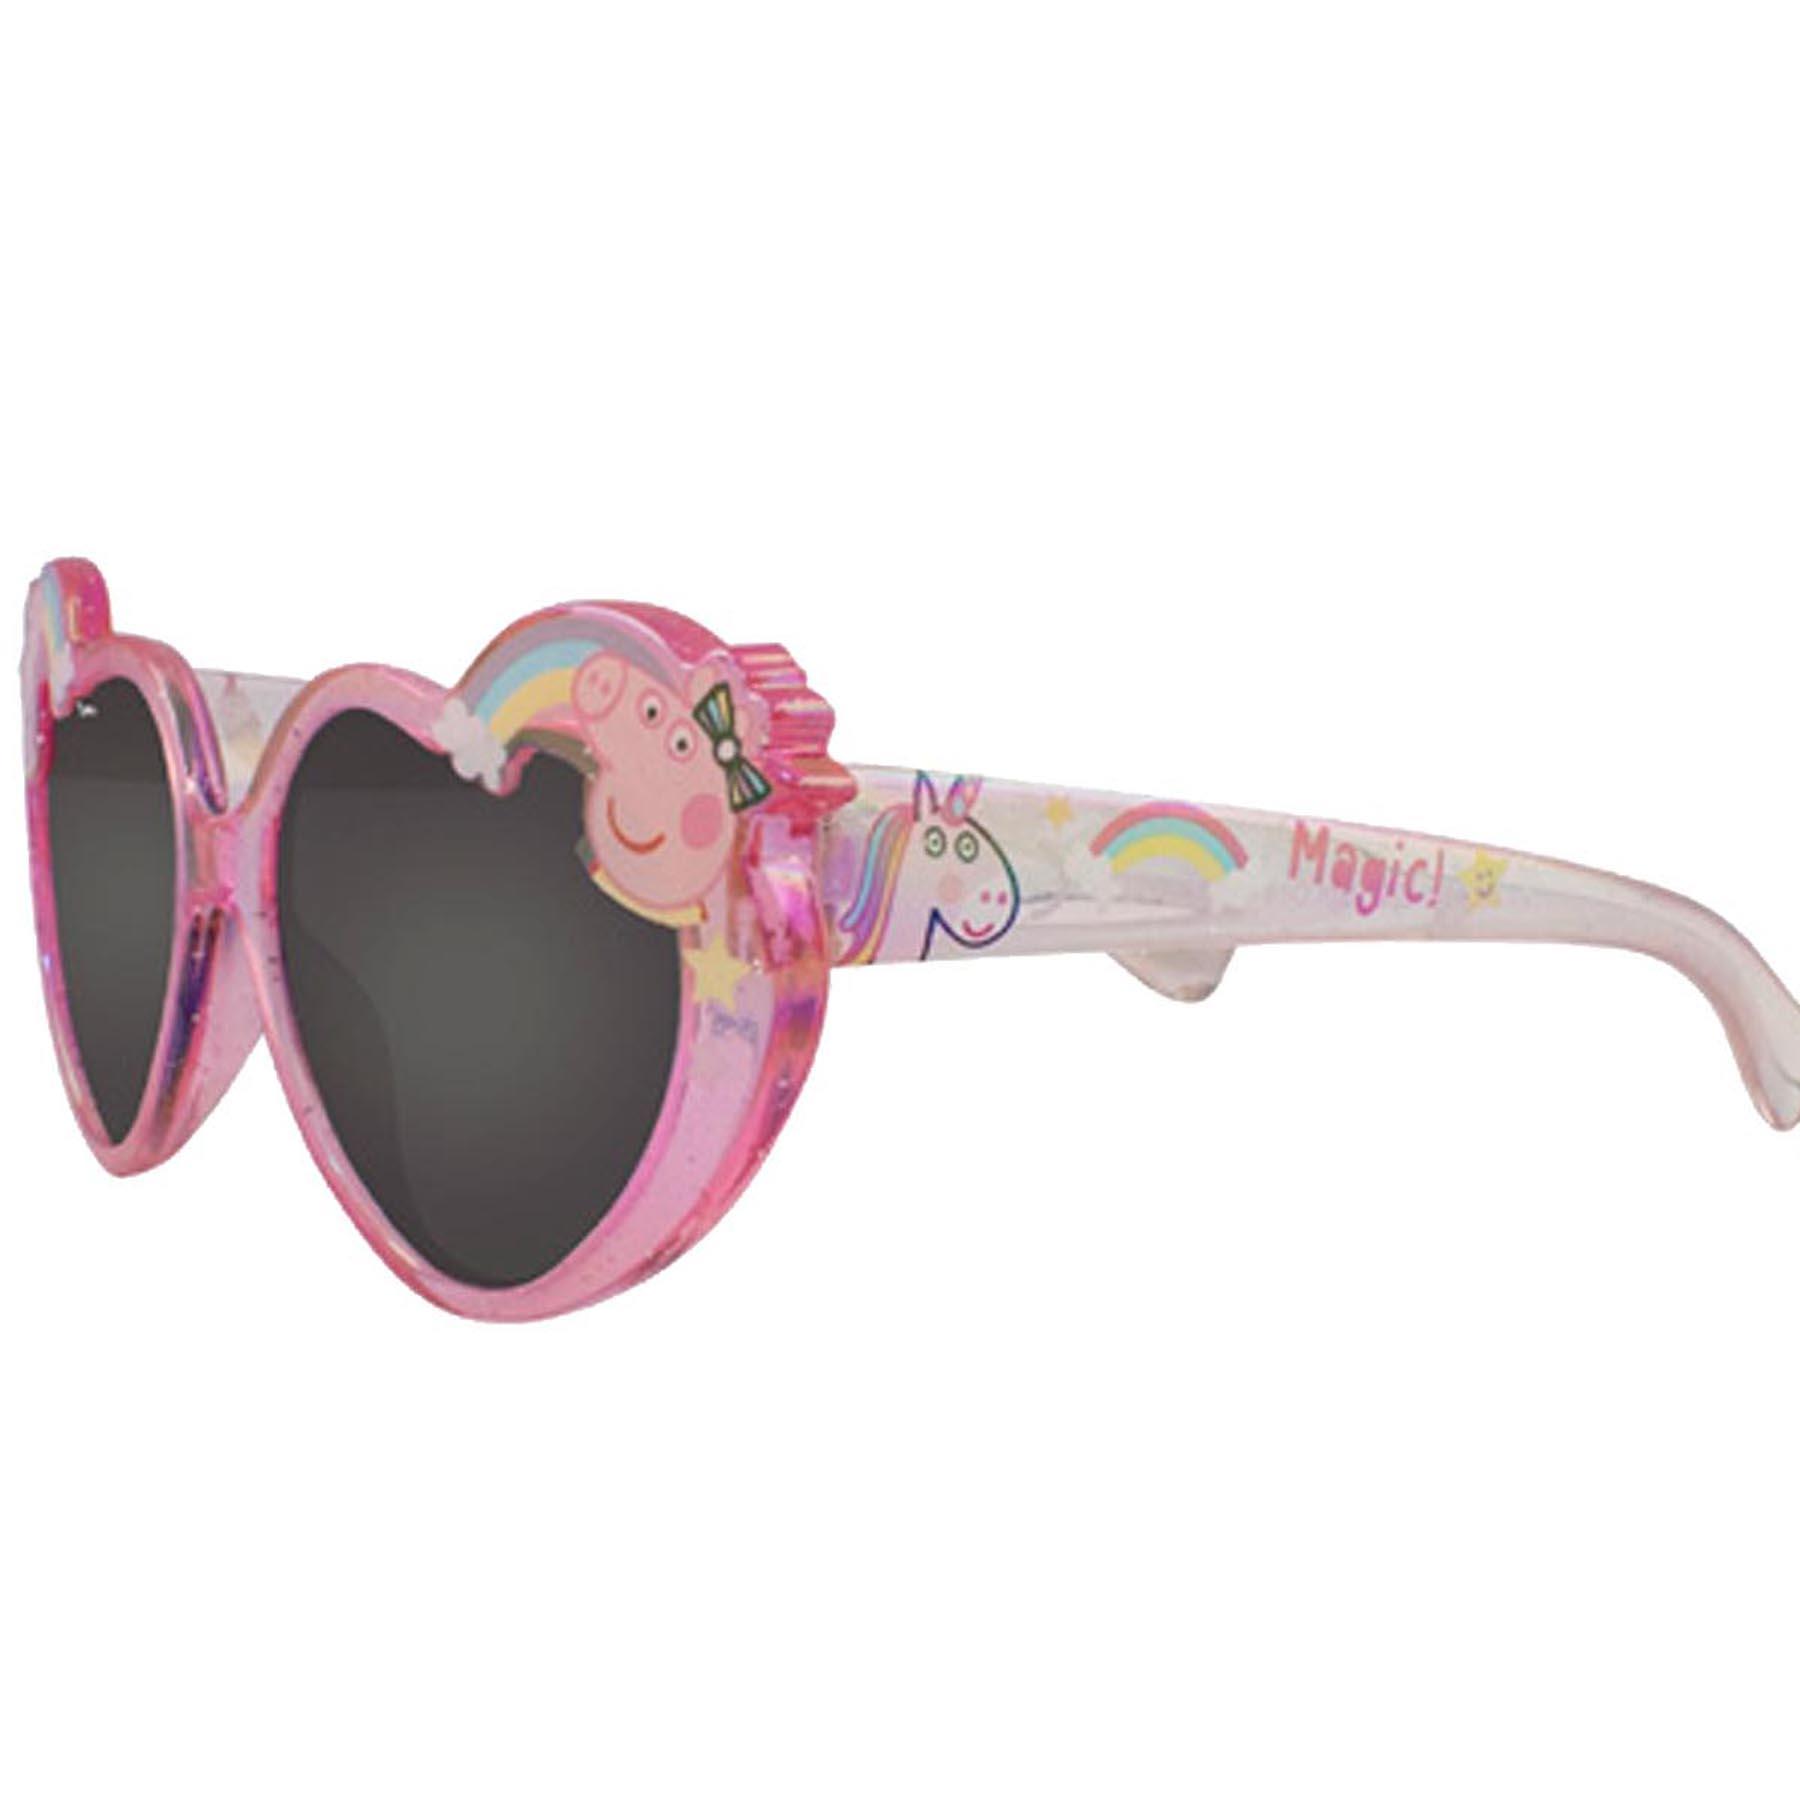 Peppa Pig Children's Character Sunglasses UV protection for Holiday - PEPPA1